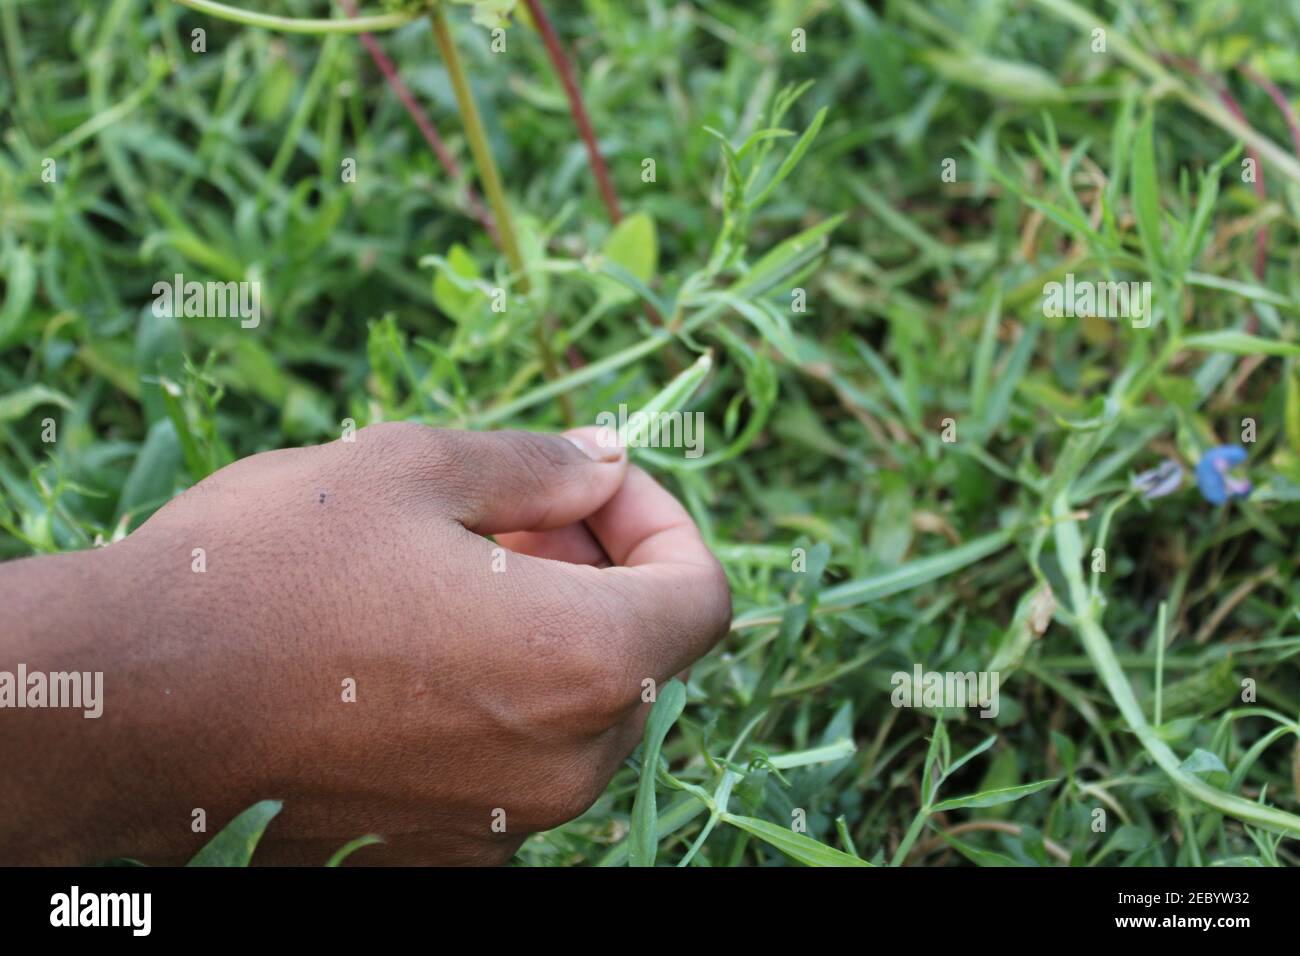 Fresh healthy vegetable food in the field photo capture from Bangladesh Stock Photo